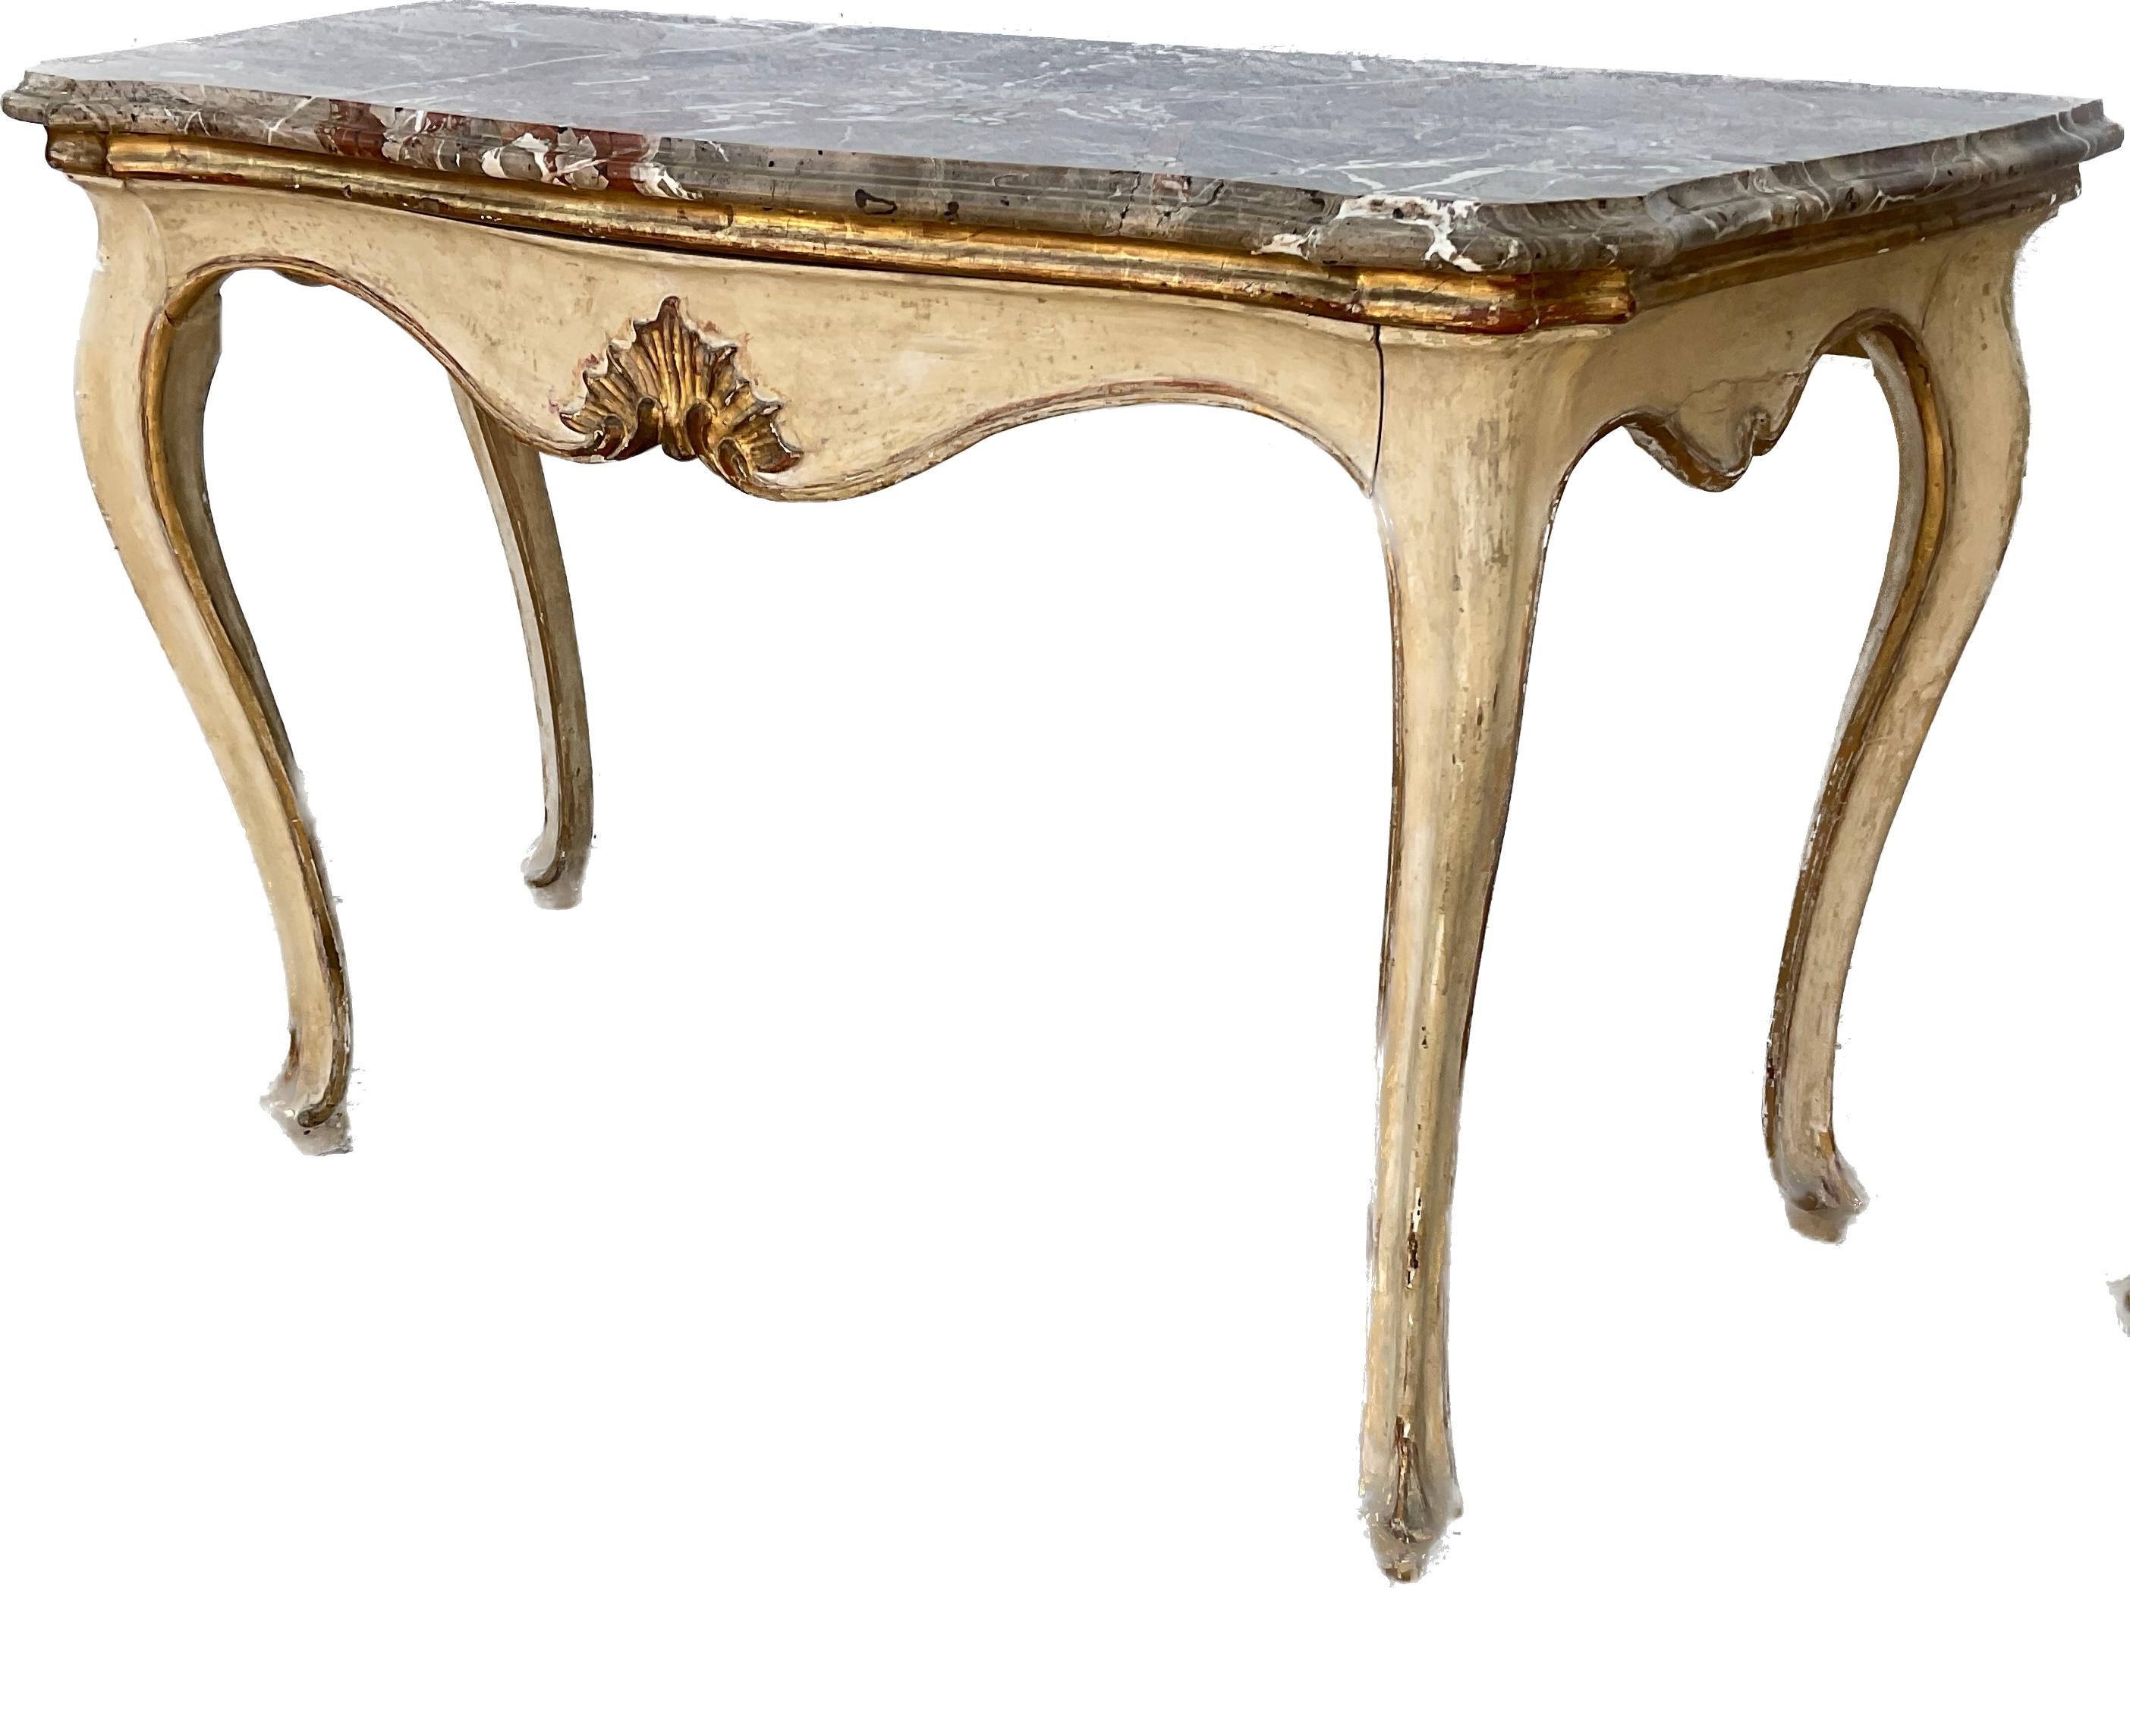 Pair of 19th Century Italian Painted and Gilt Marble-Top Console Tables For Sale 5